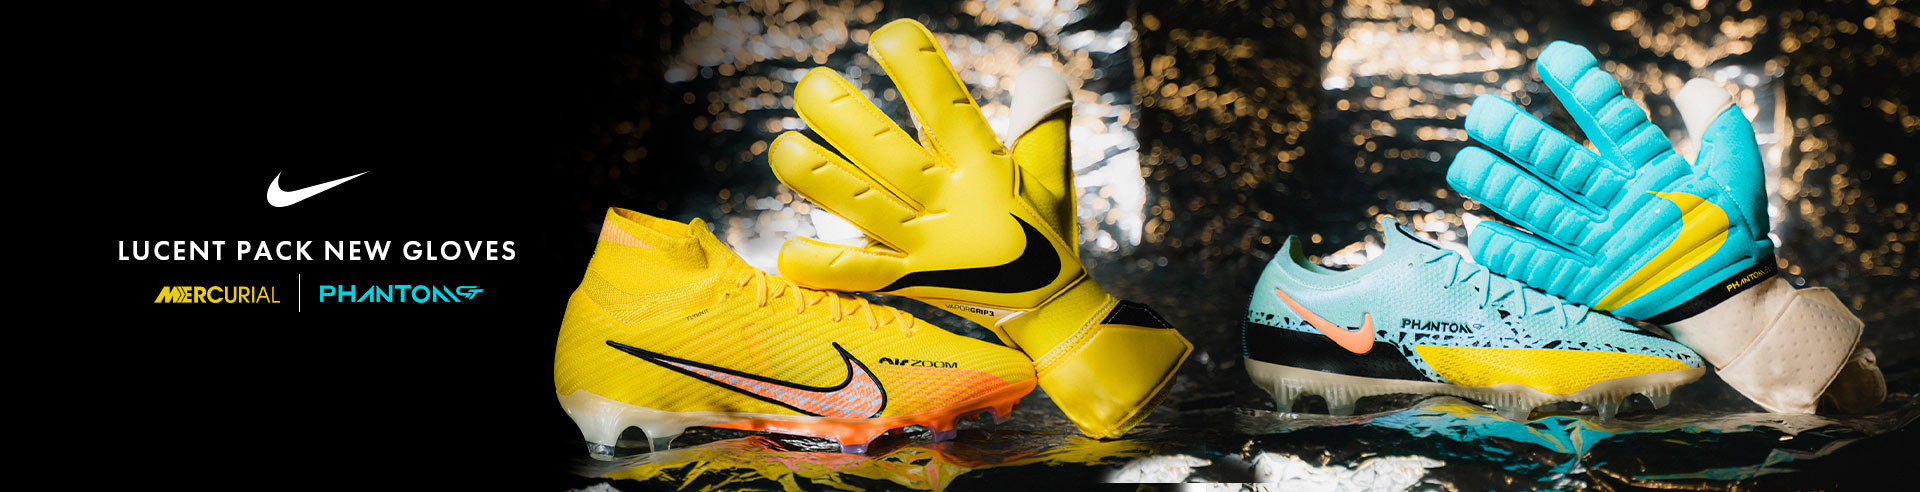 NIKE LUCENT PACK GLOVES SEPTIEMBRE 2022